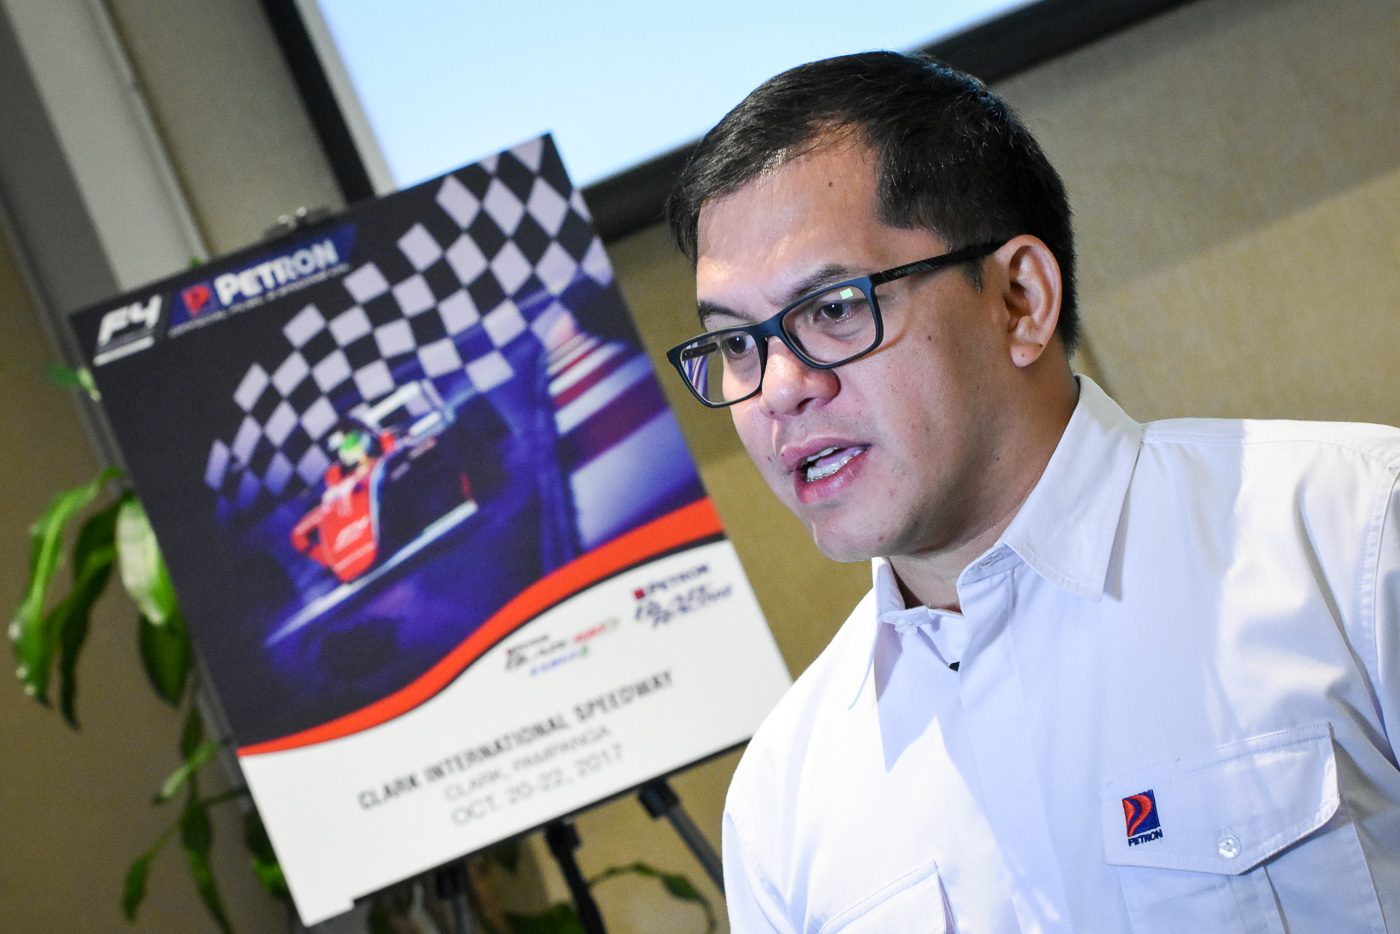 Petron announced as F4 SEA’s official fuel and engine oil partner